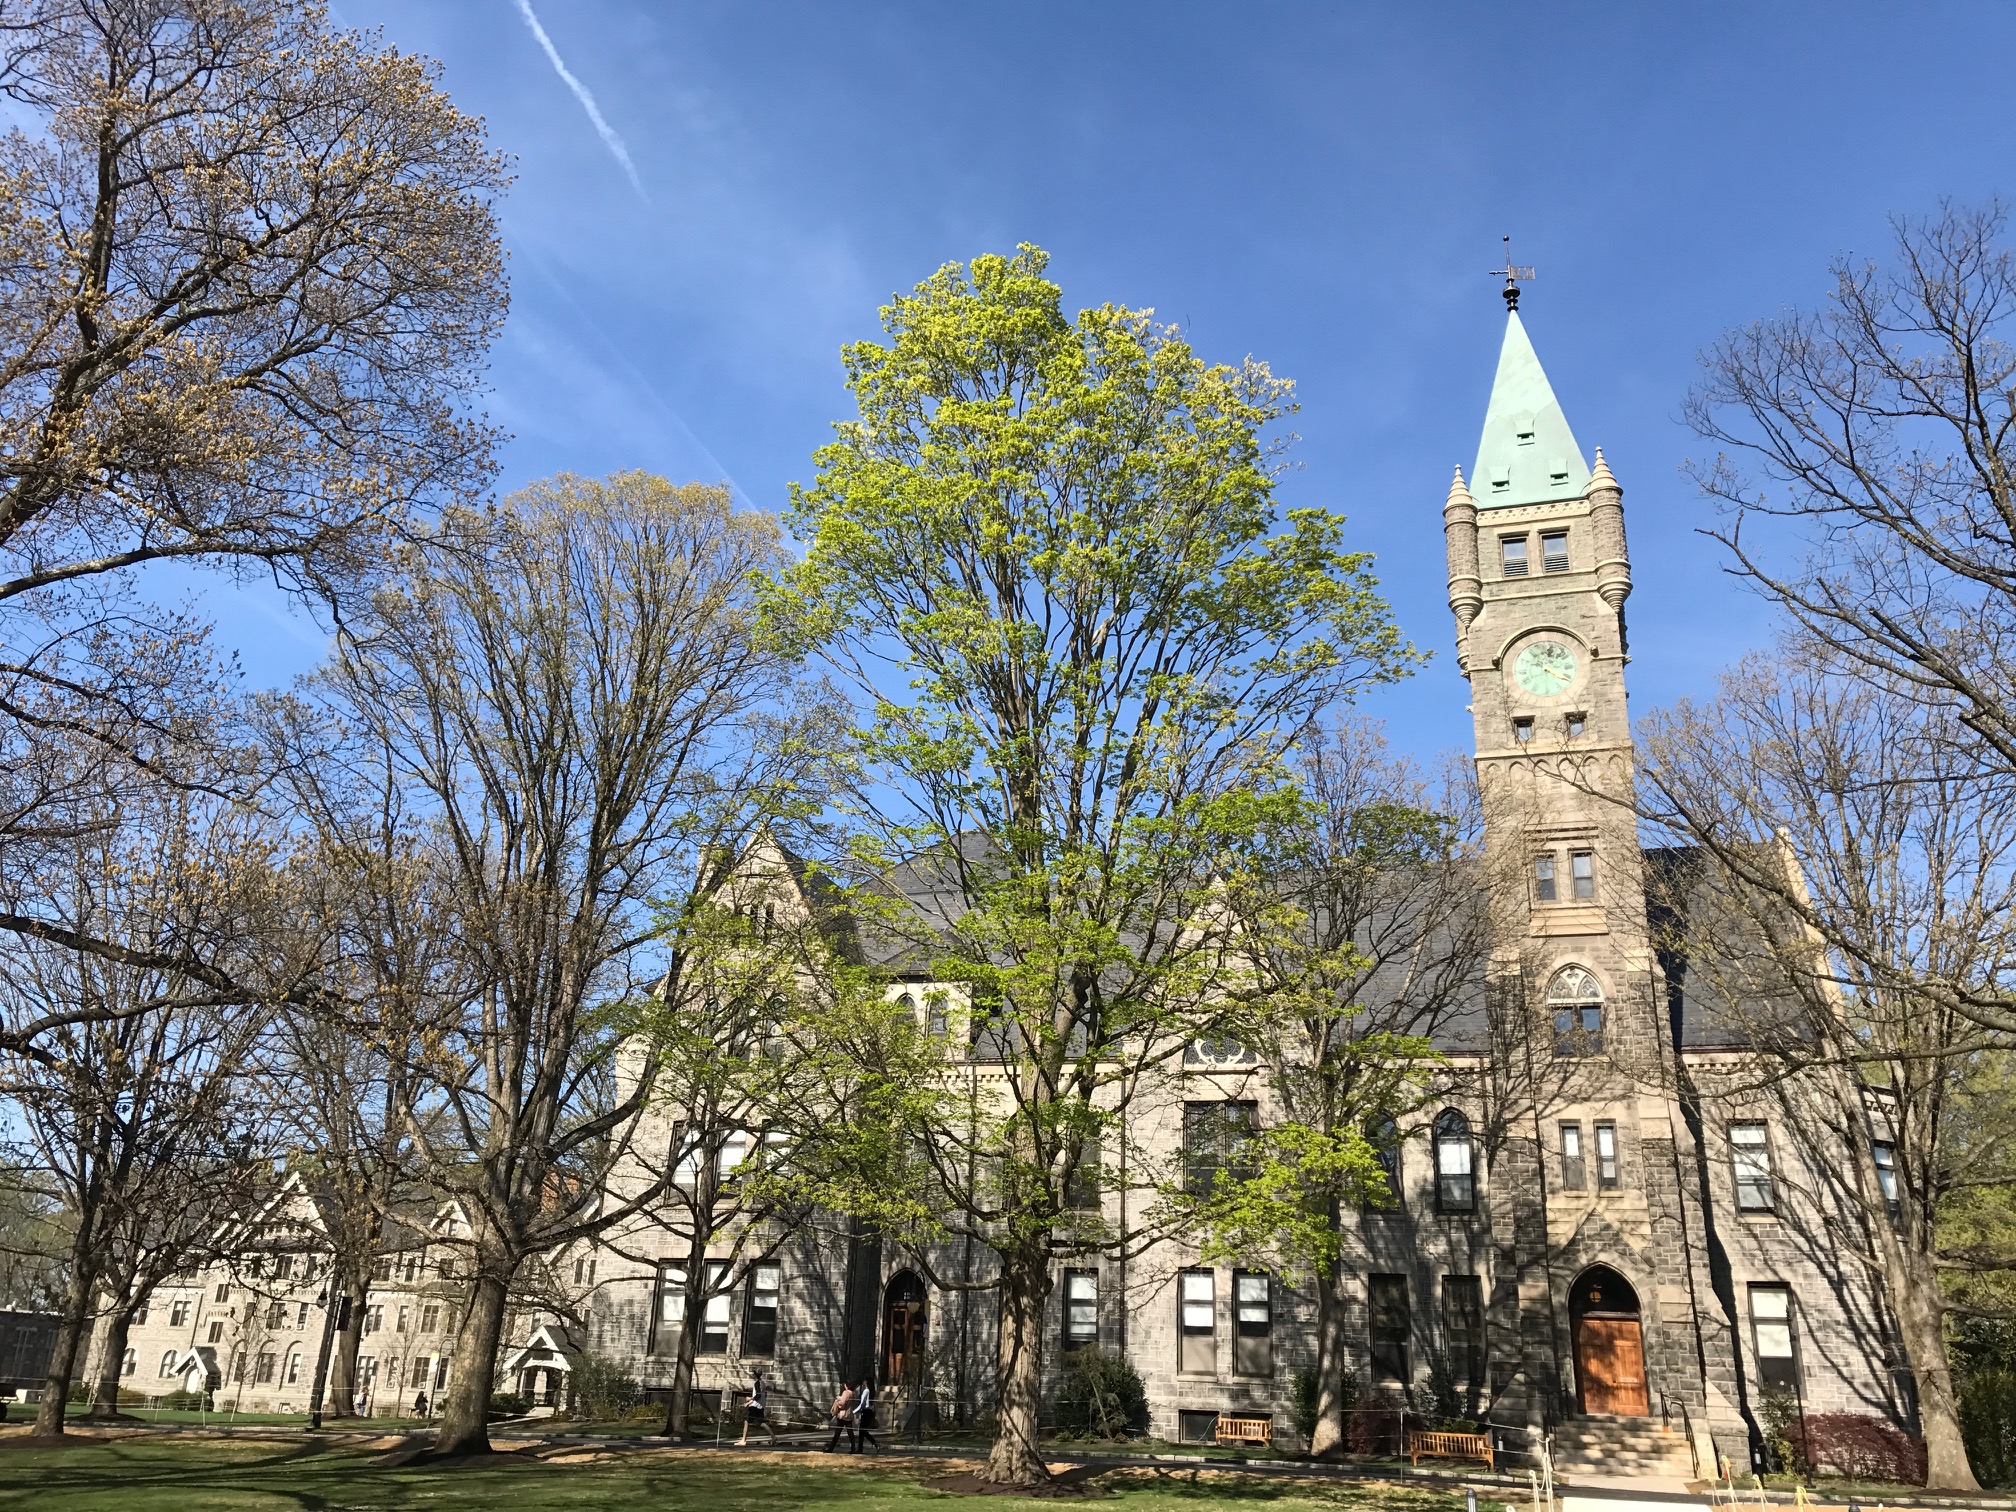 Springtime at Bryn Mawr and snapshots of our campus in all its glory ...